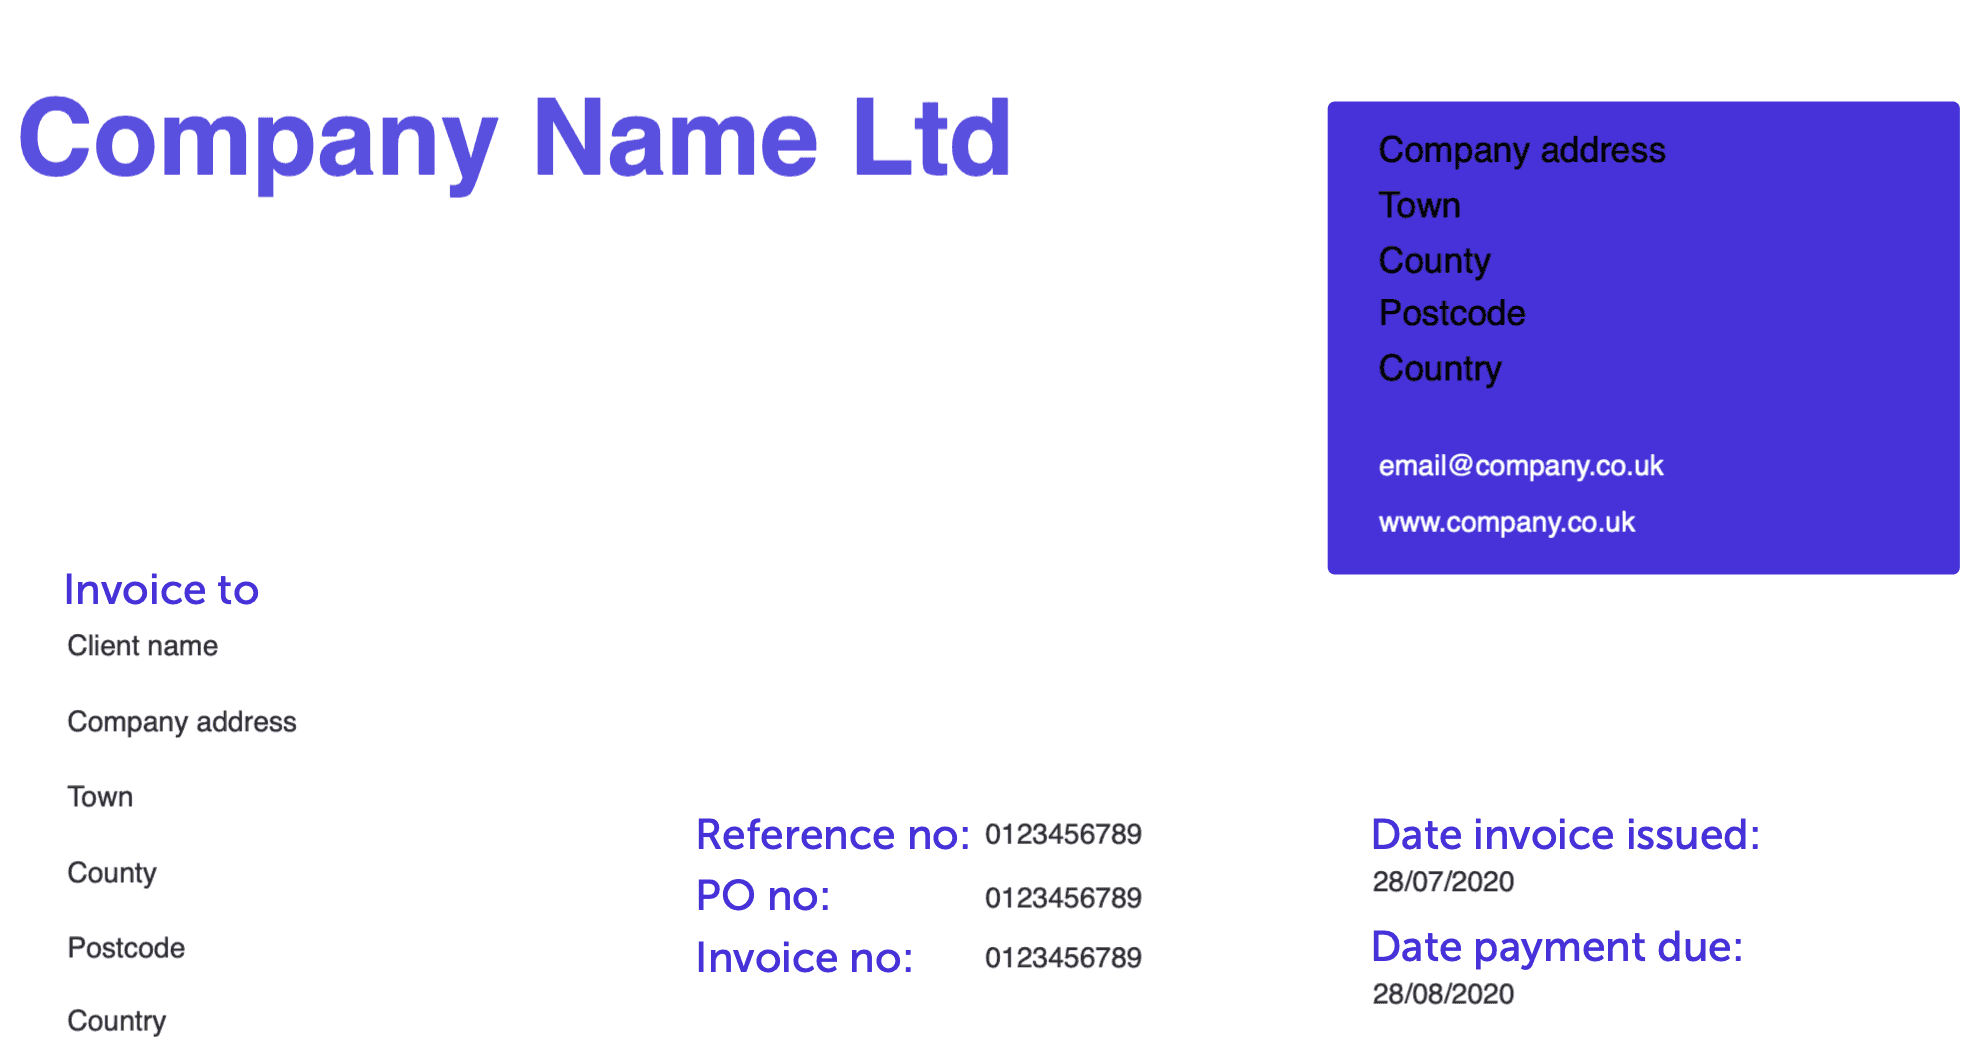 Invoice example showing company details and dates